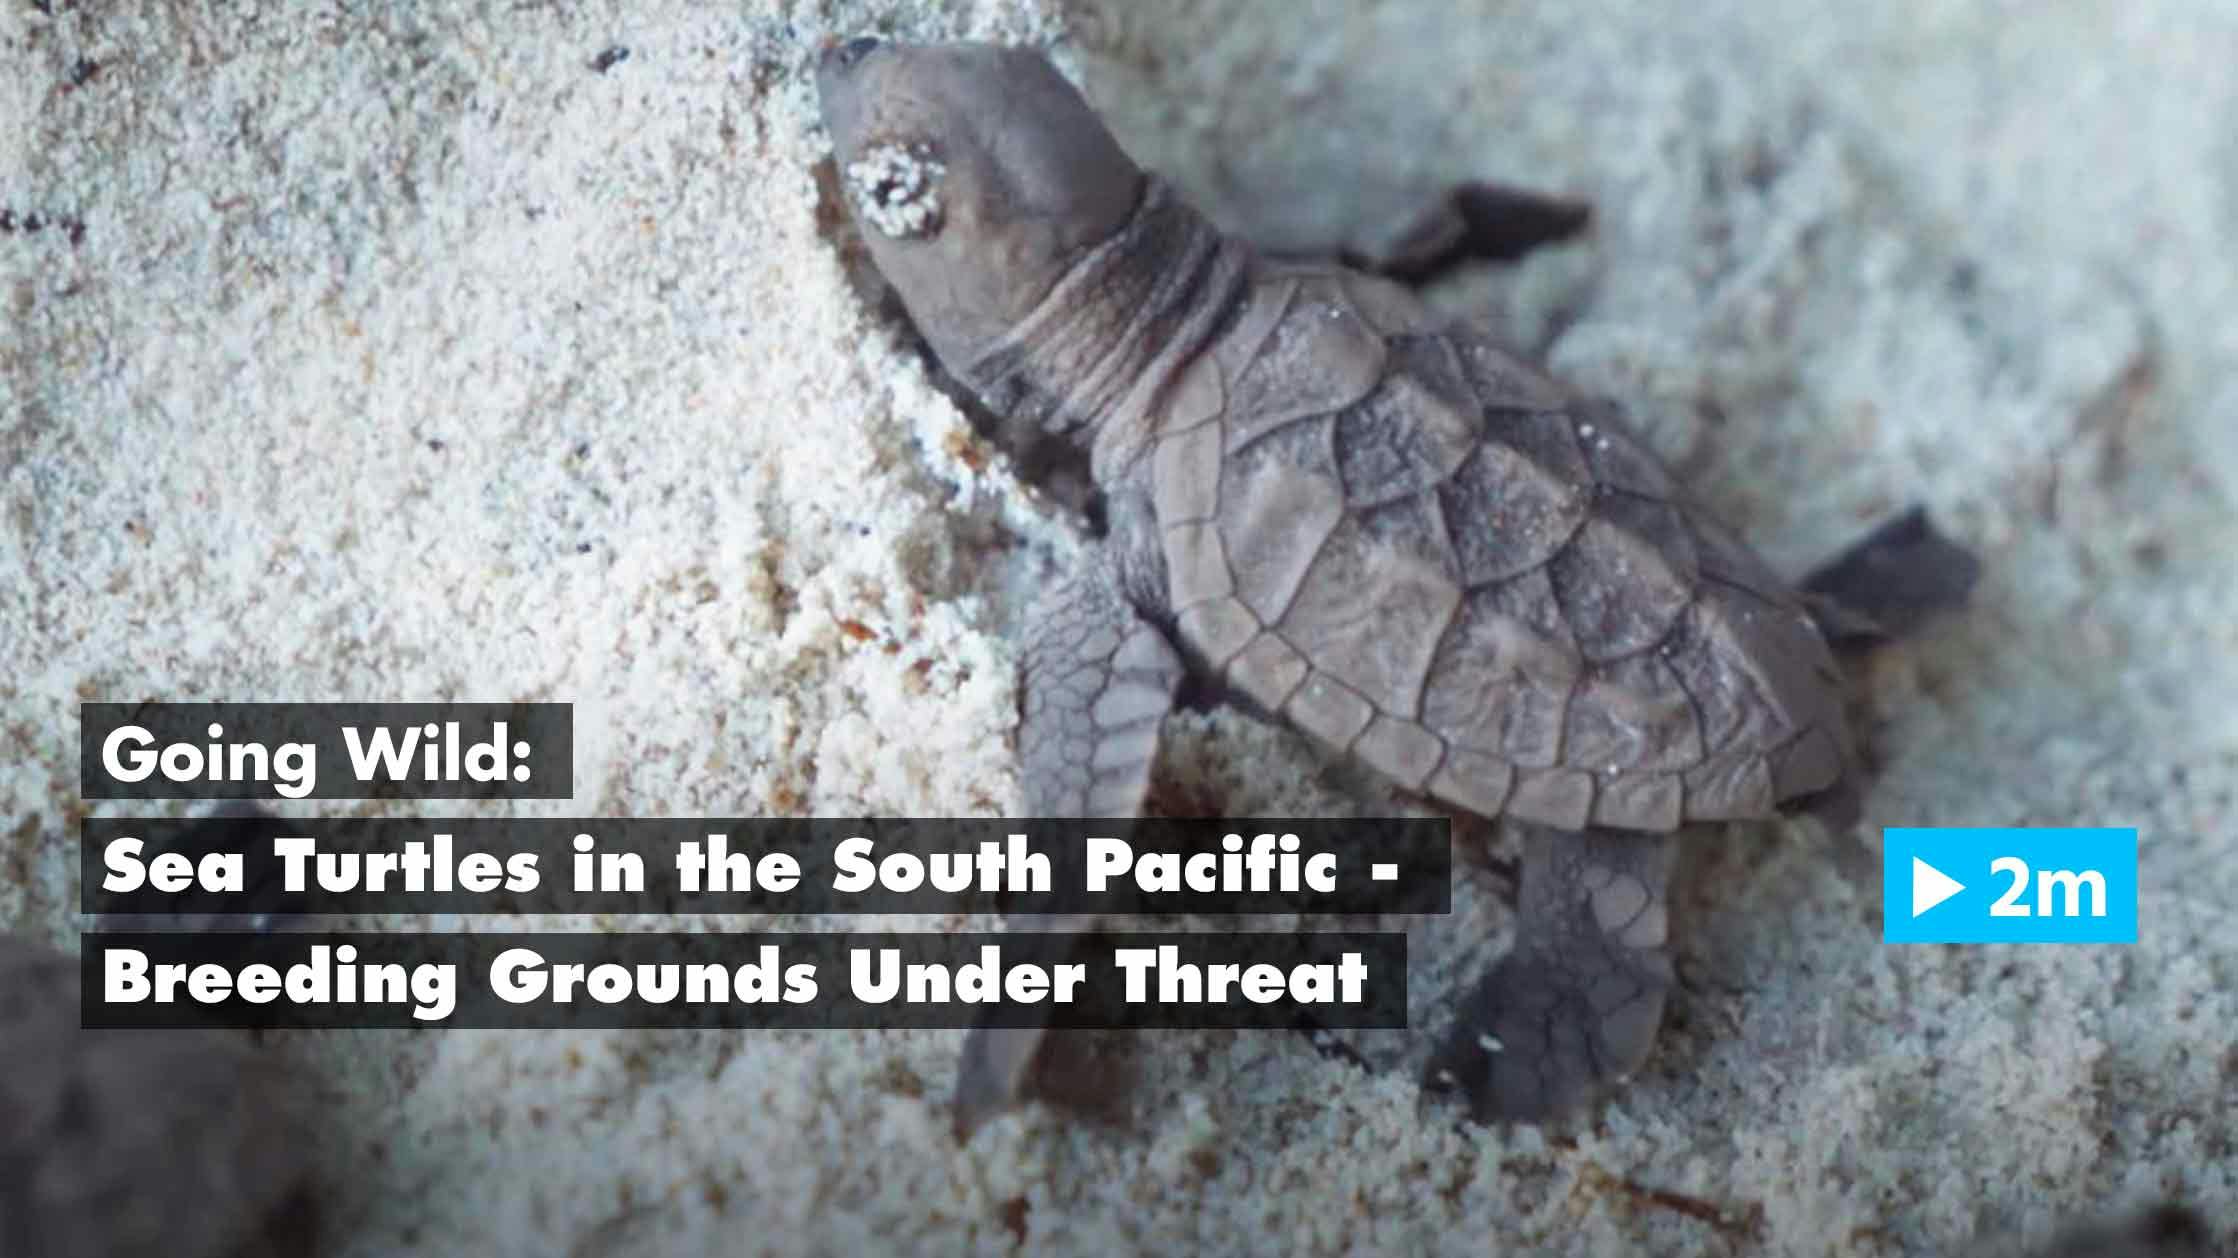 Going Wild: Sea Turtles in the South Pacific – Breeding Grounds Under Threat